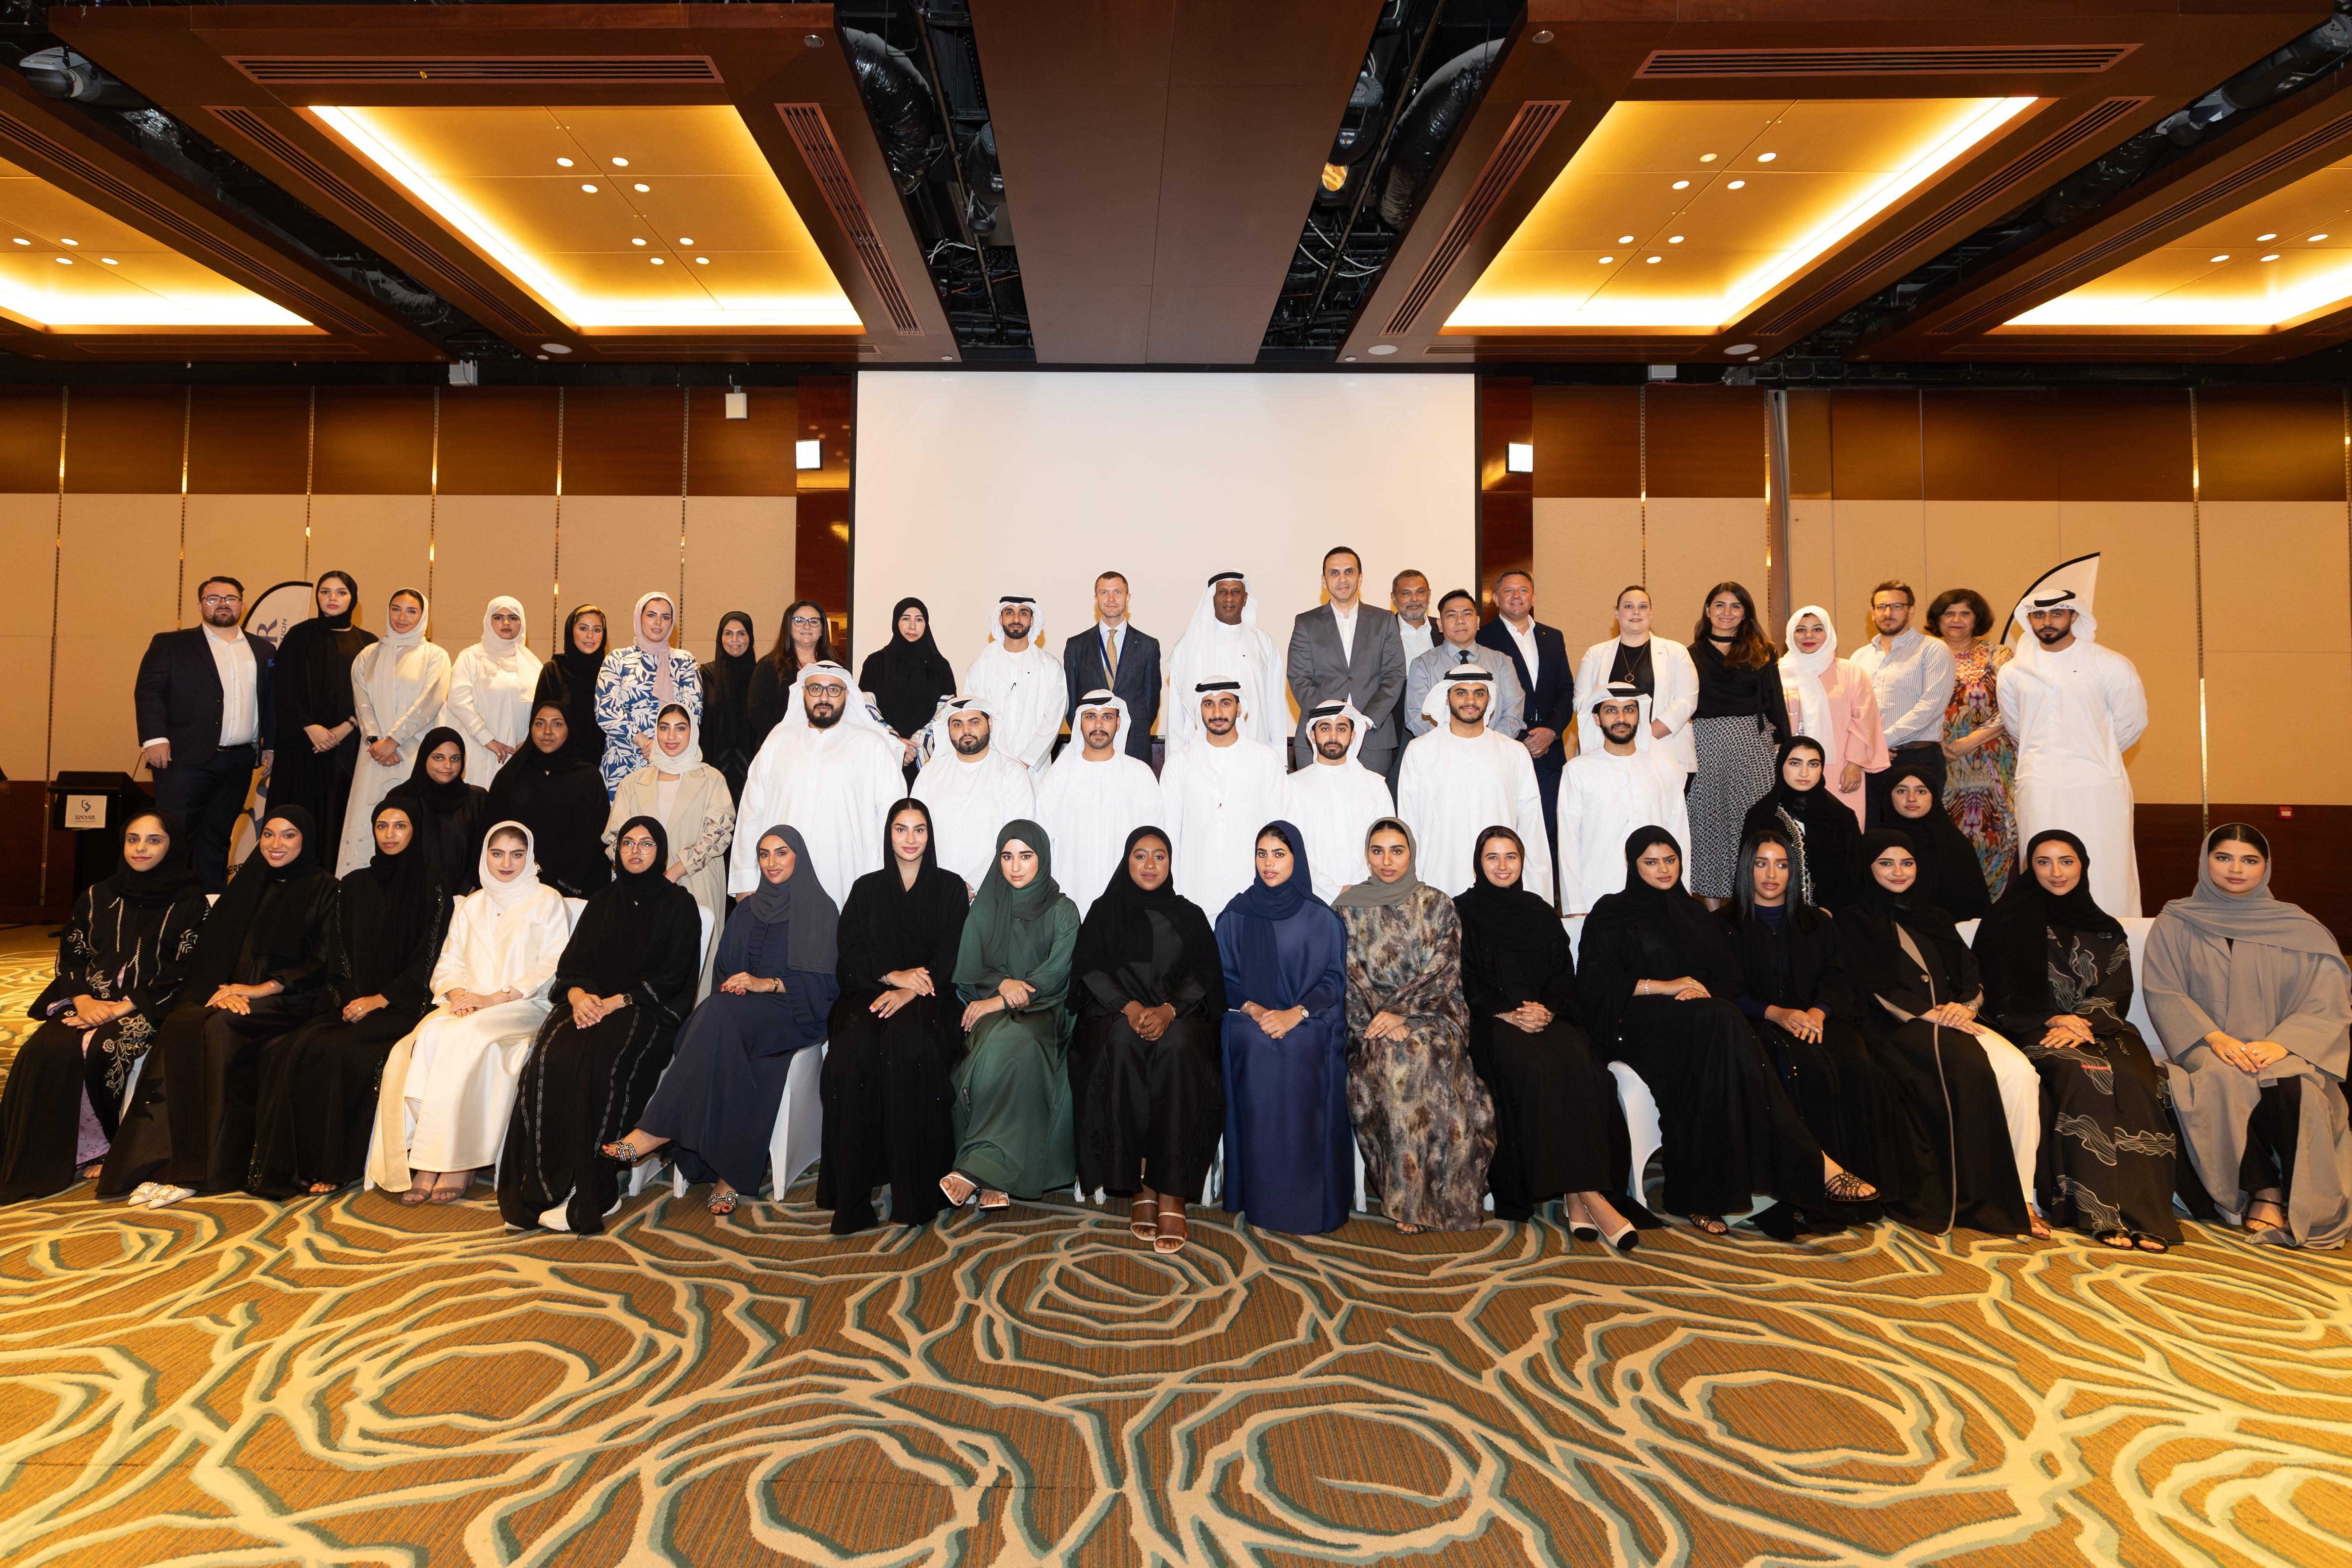 Al-Futtaim Group Celebrates The Graduation of 35 Emiratis in the Sinyar Management Trainee Programme in Partnership with FranklinCovey Middle East